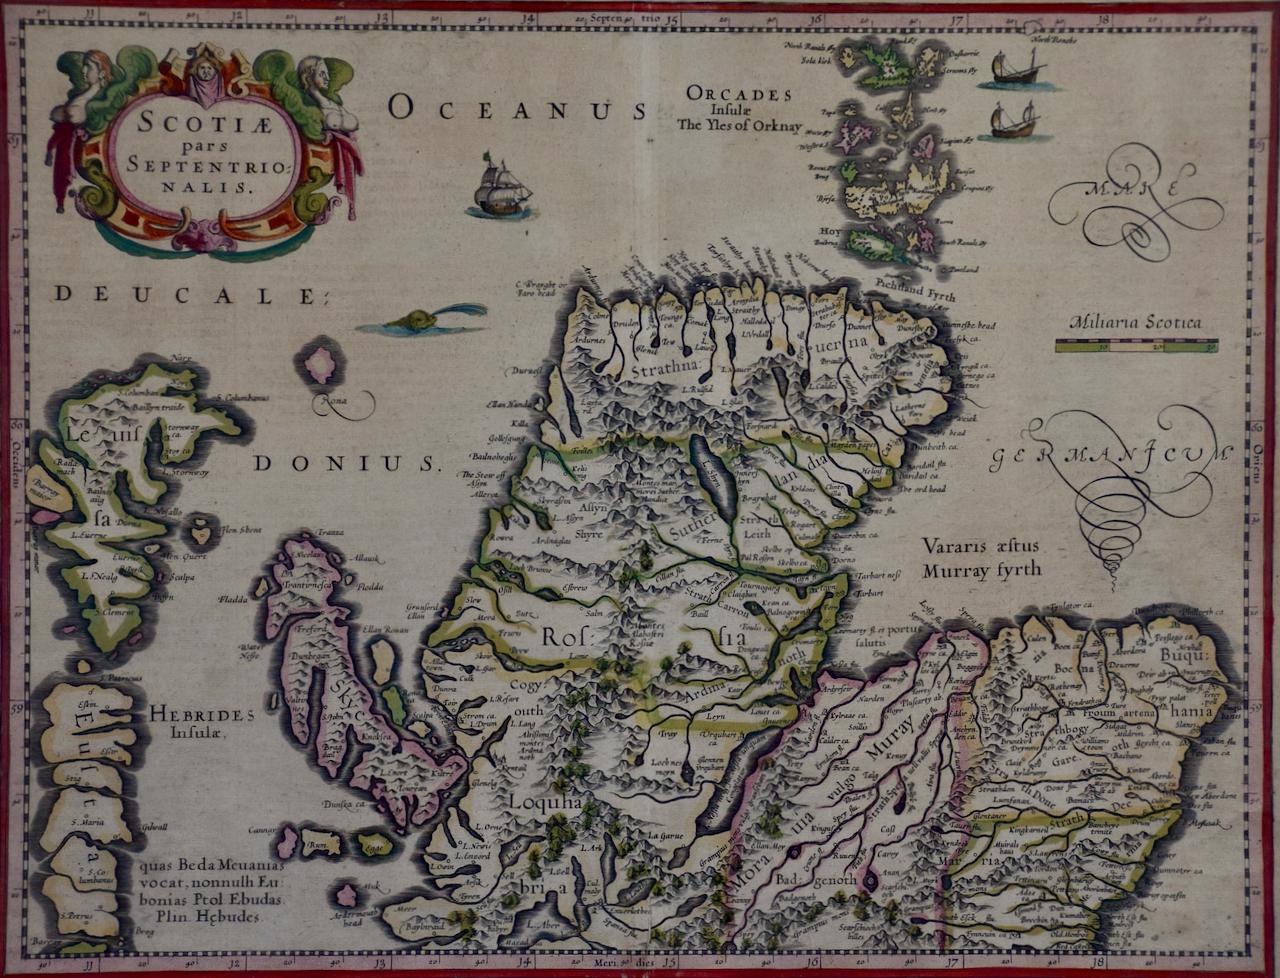 This is a framed hand-colored 17th century map of Northern Scotland by Gerard Mercator entitled 